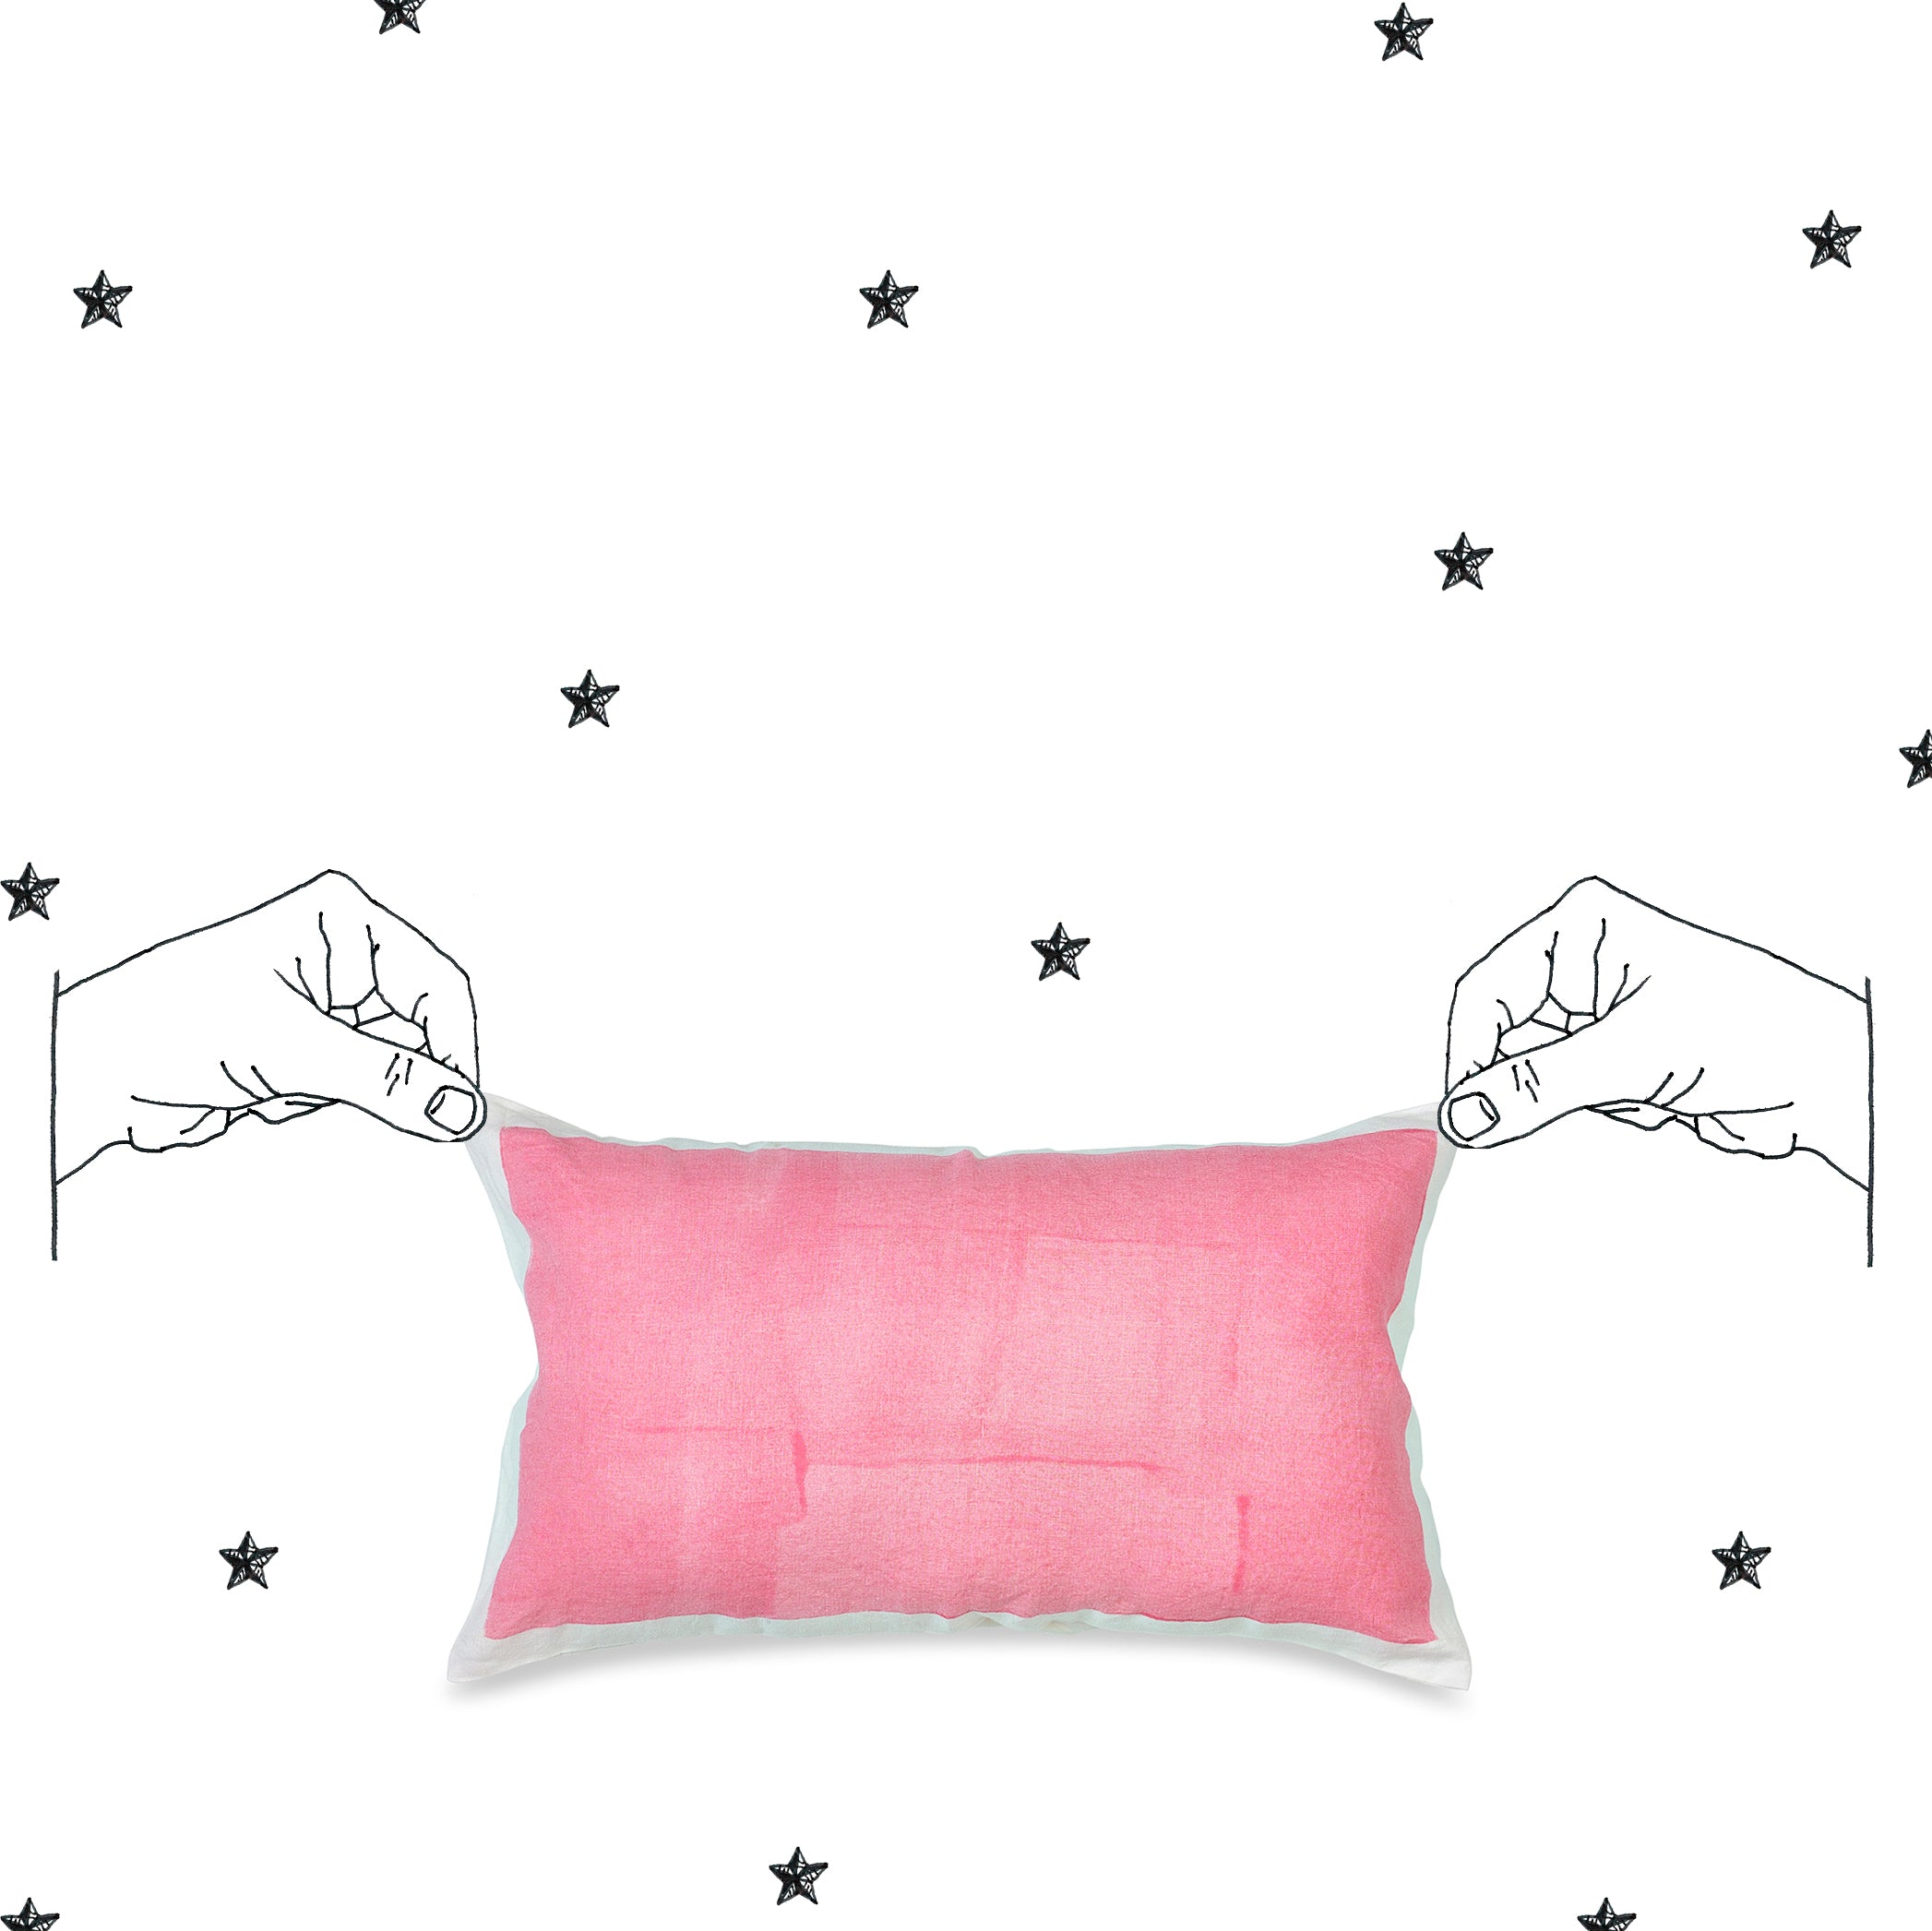 Hand Painted Linen Cushion in Rose Pink, 50cm x 30cm